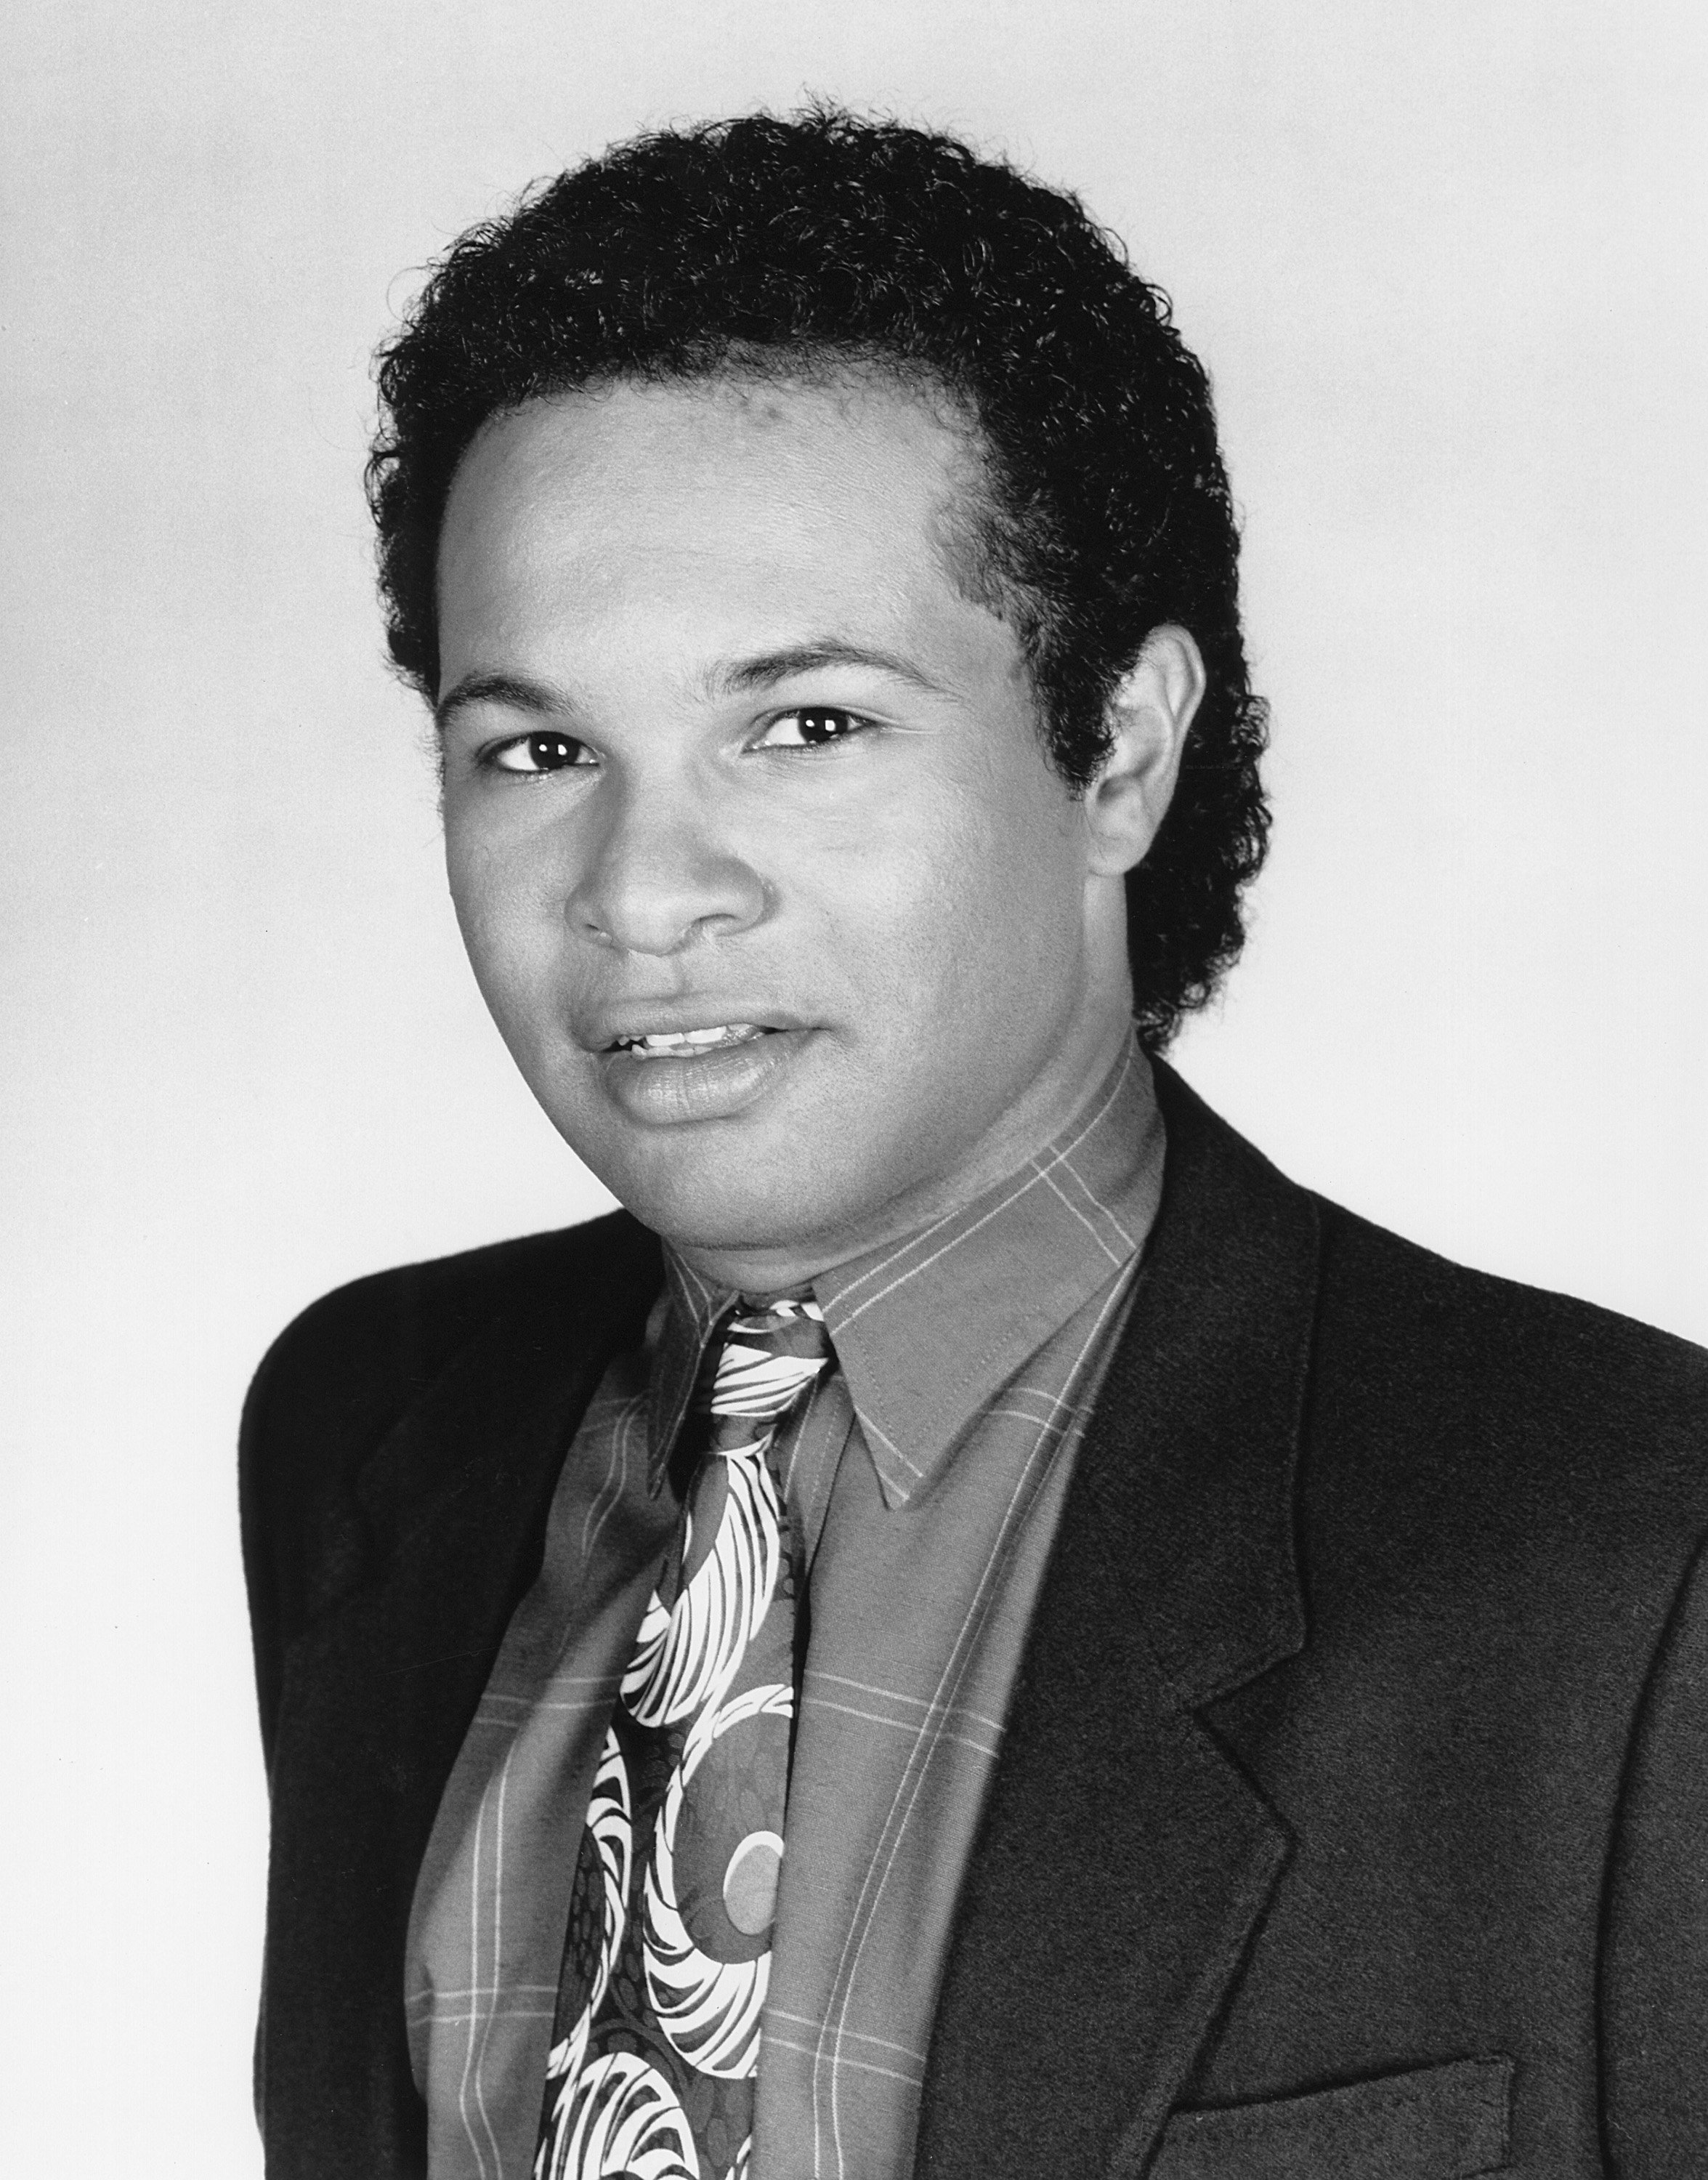 Geoffrey Owens as Elvin Tibideaux on season 7 of "The Cosby Show" | Photo: Getty Images